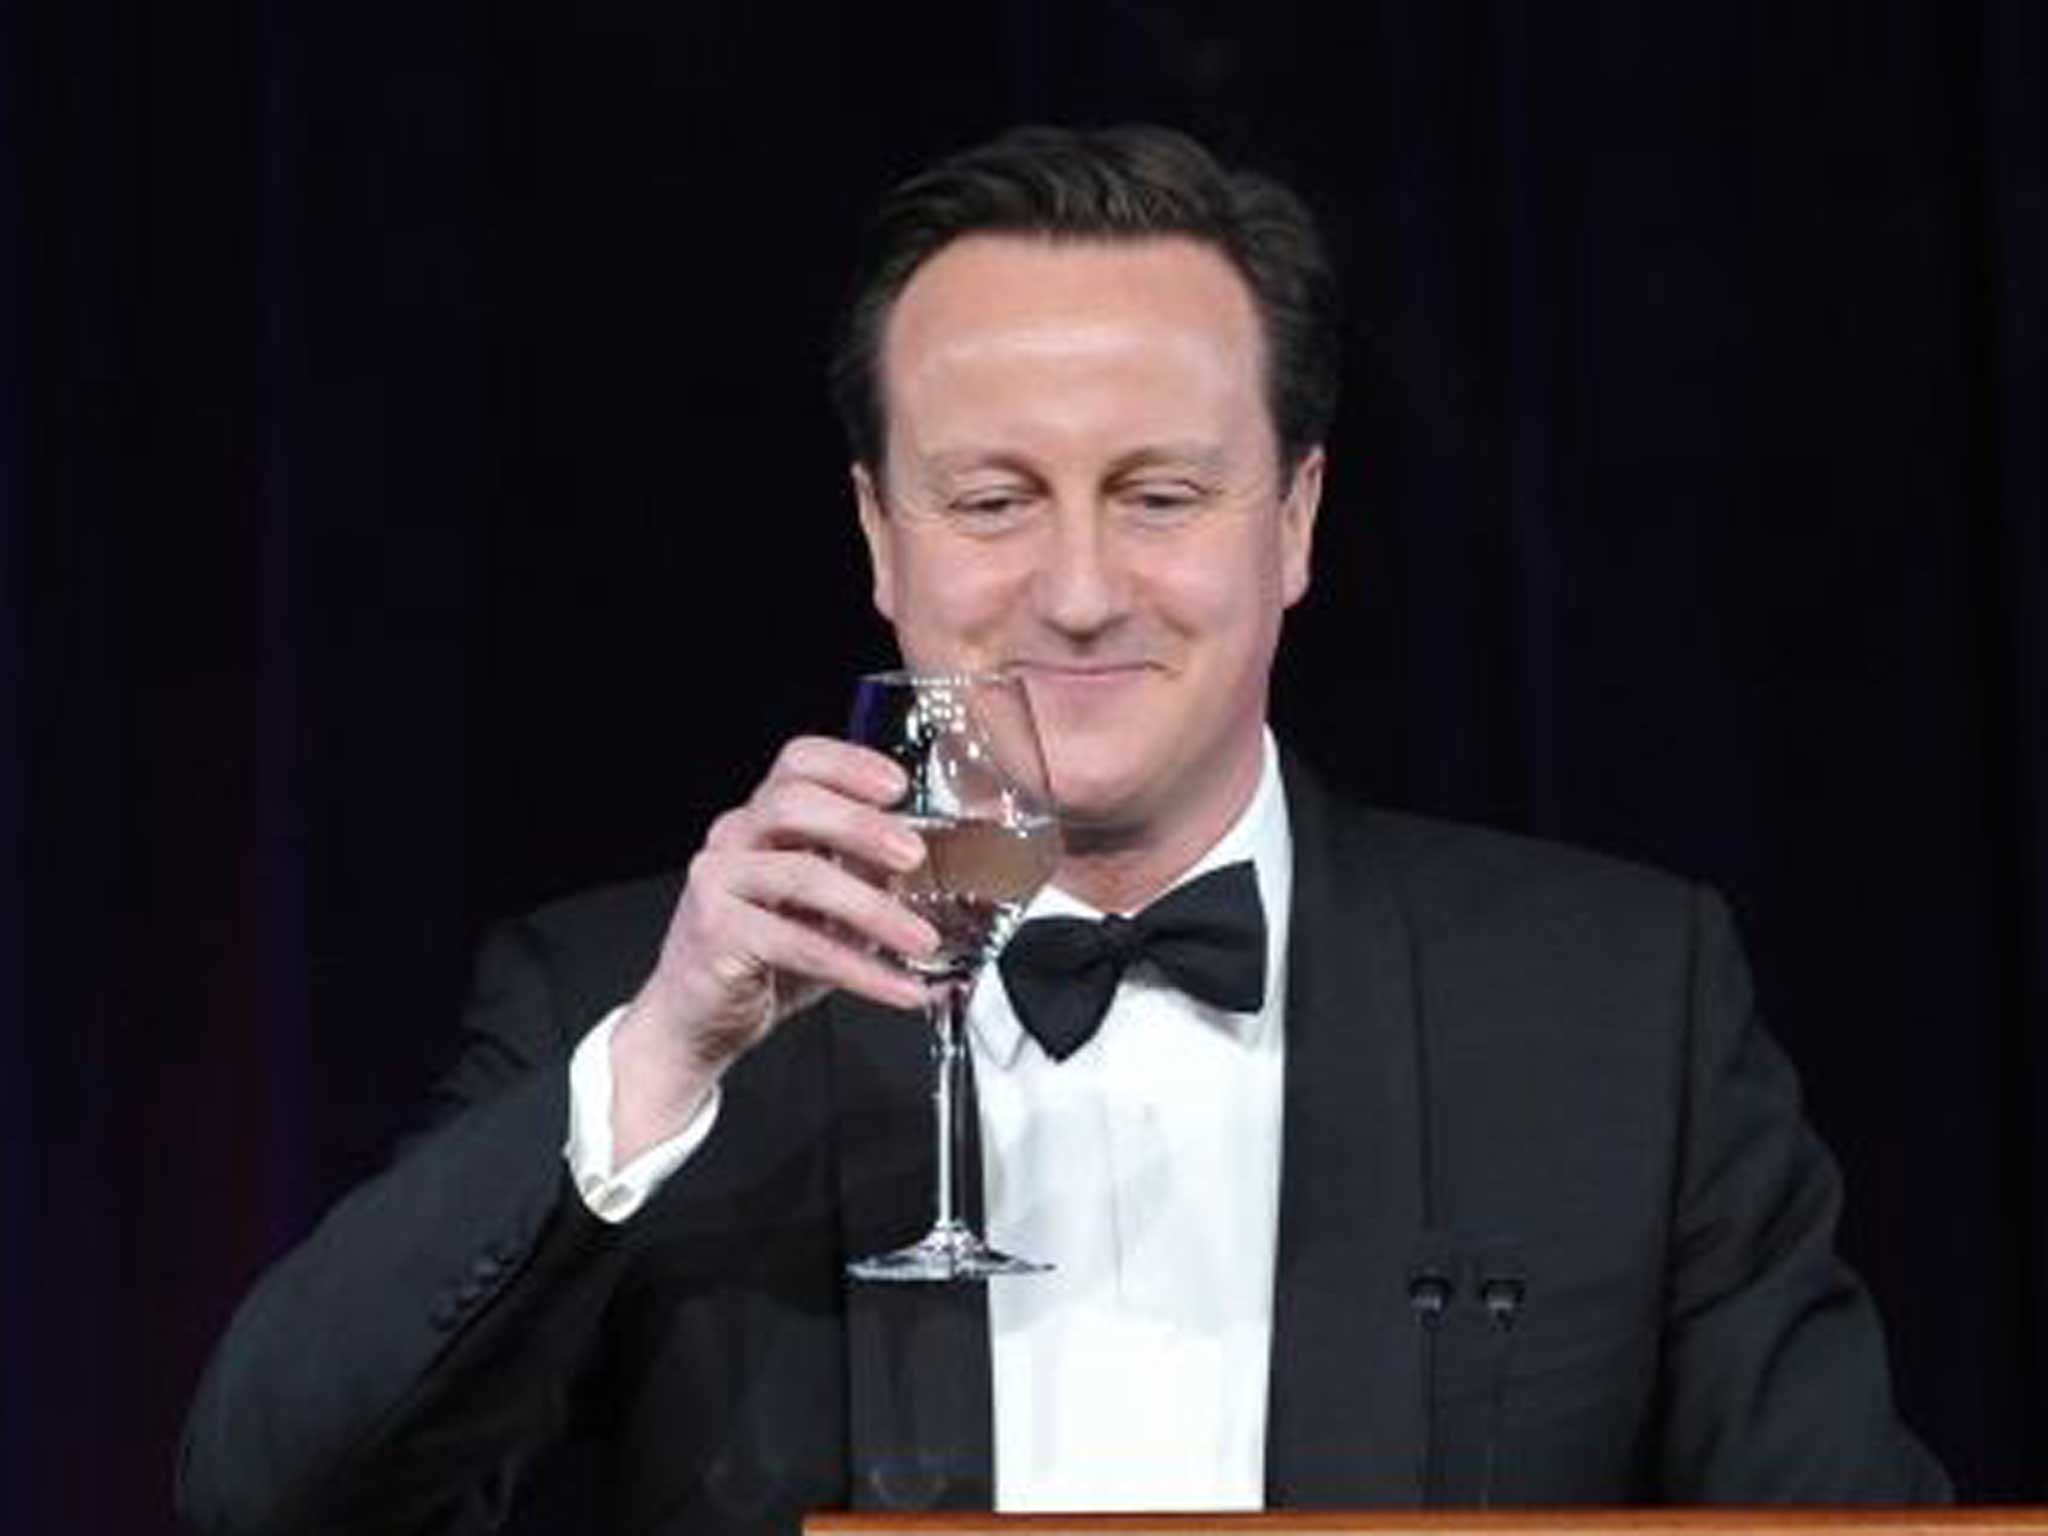 David Cameron: Most likely to drink champagne, followed by red wine and gin and tonic